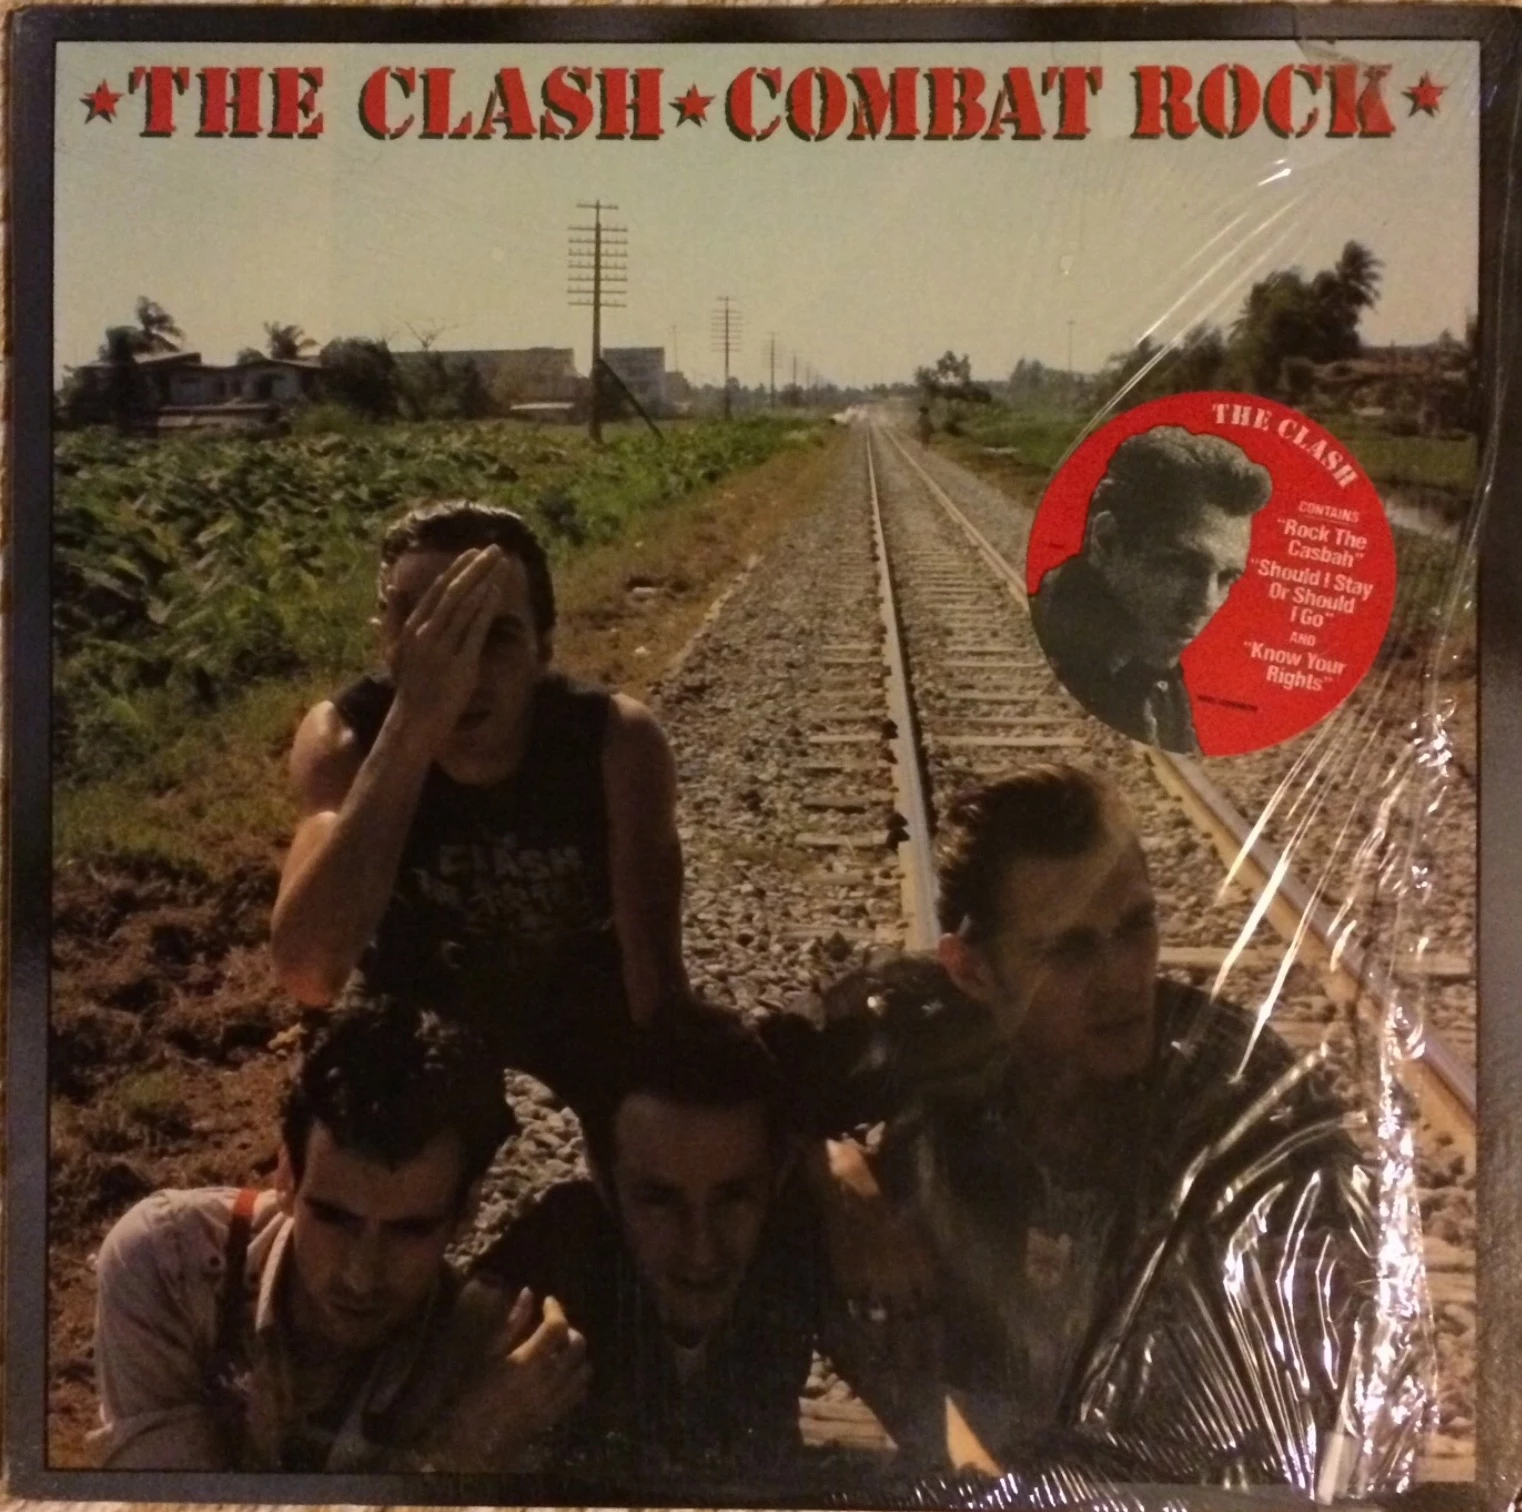 Craig Allen's Fun Facts: “Rock The Casbah” by the Clash